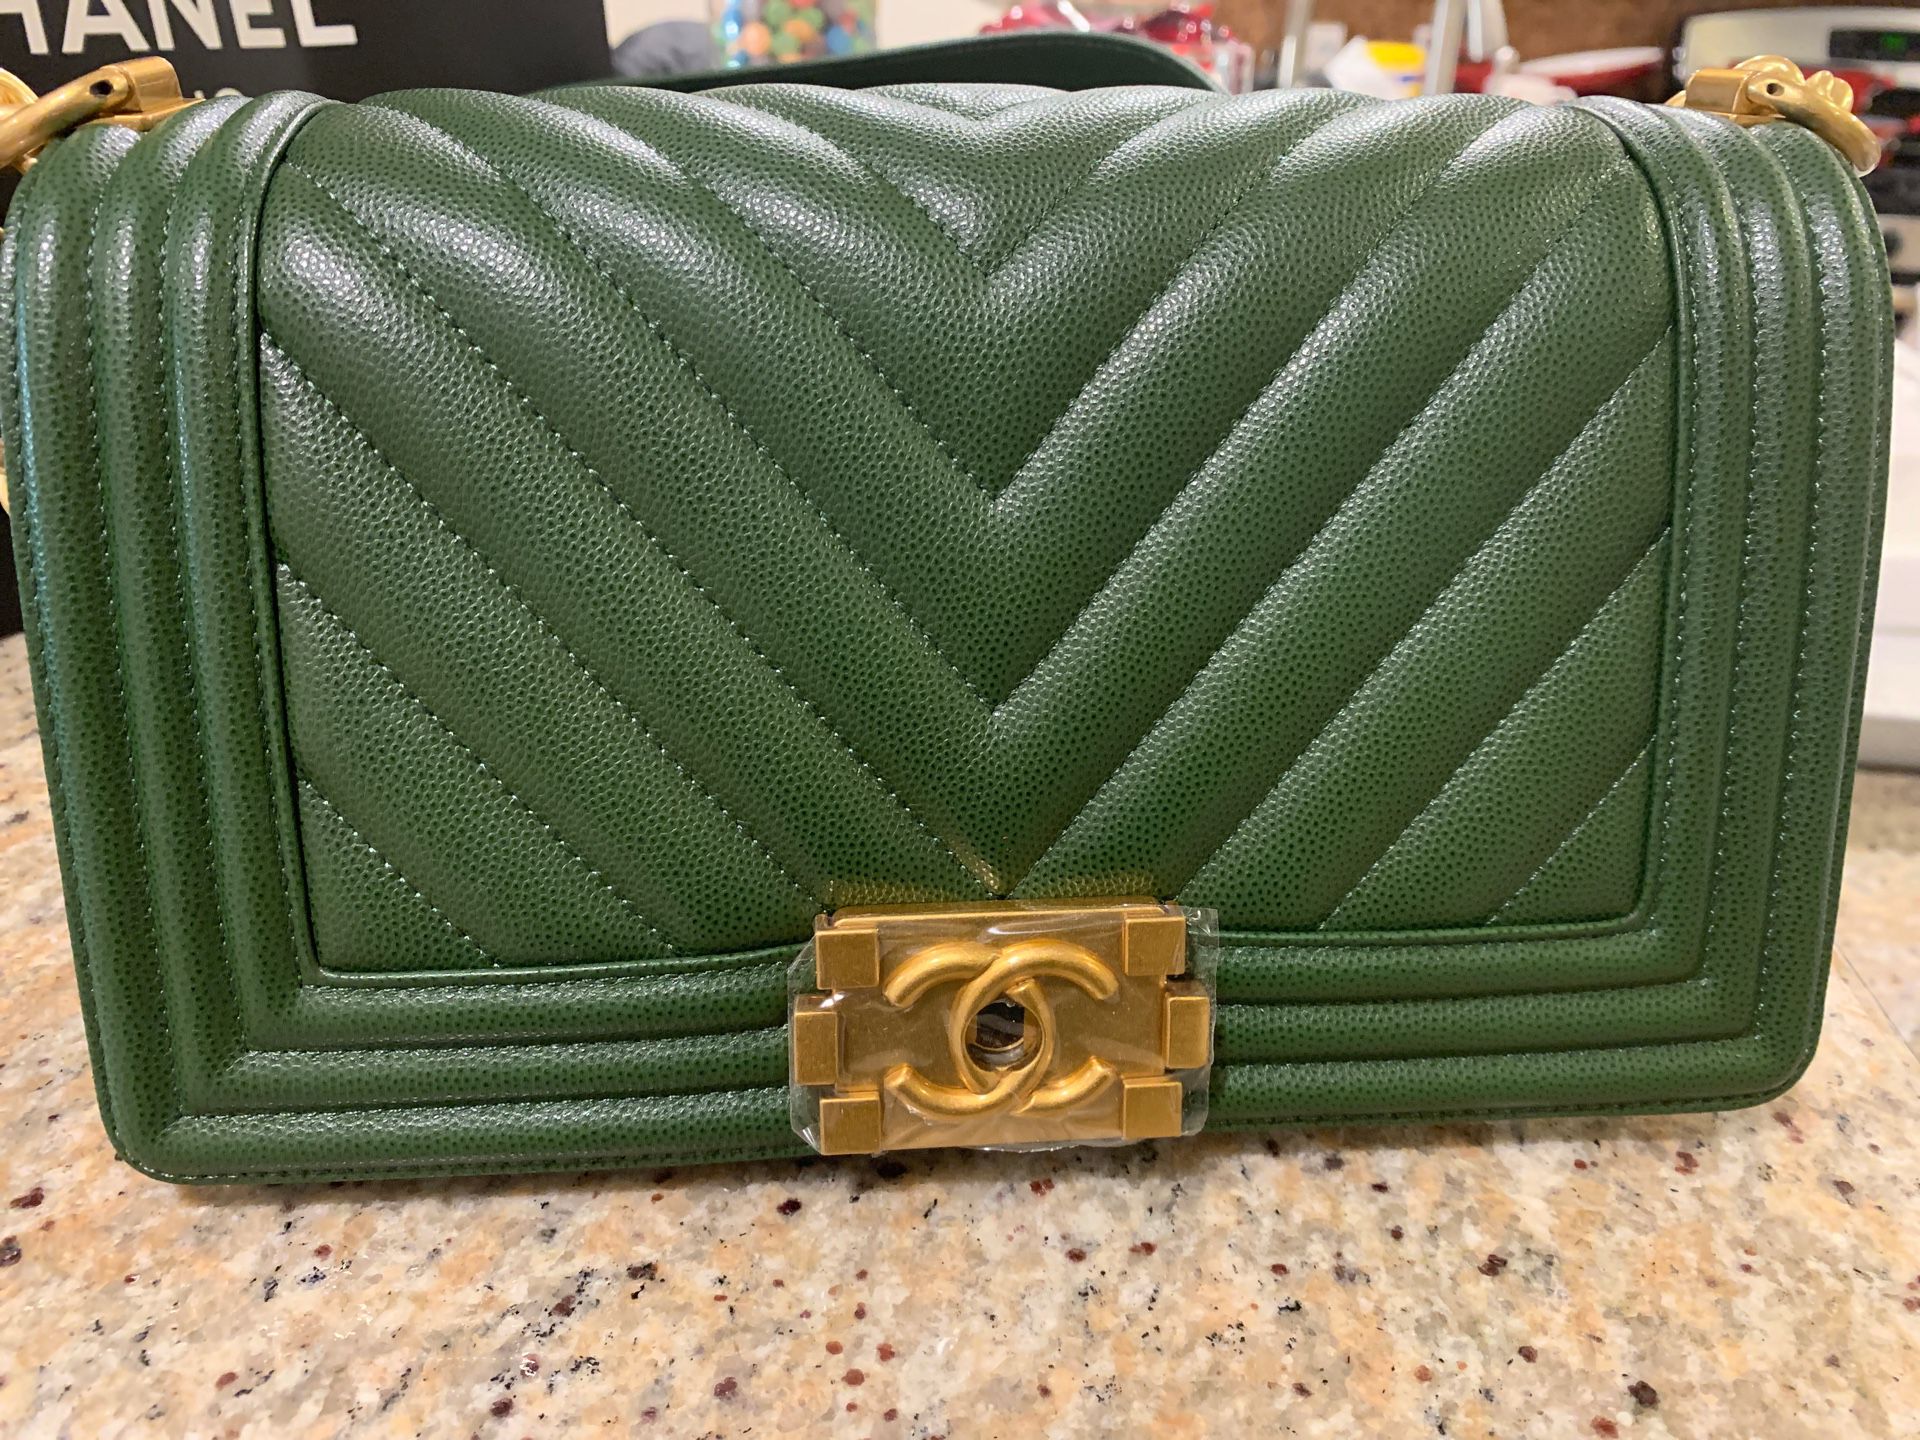 Chanel Le Boy Small Bag Authentic